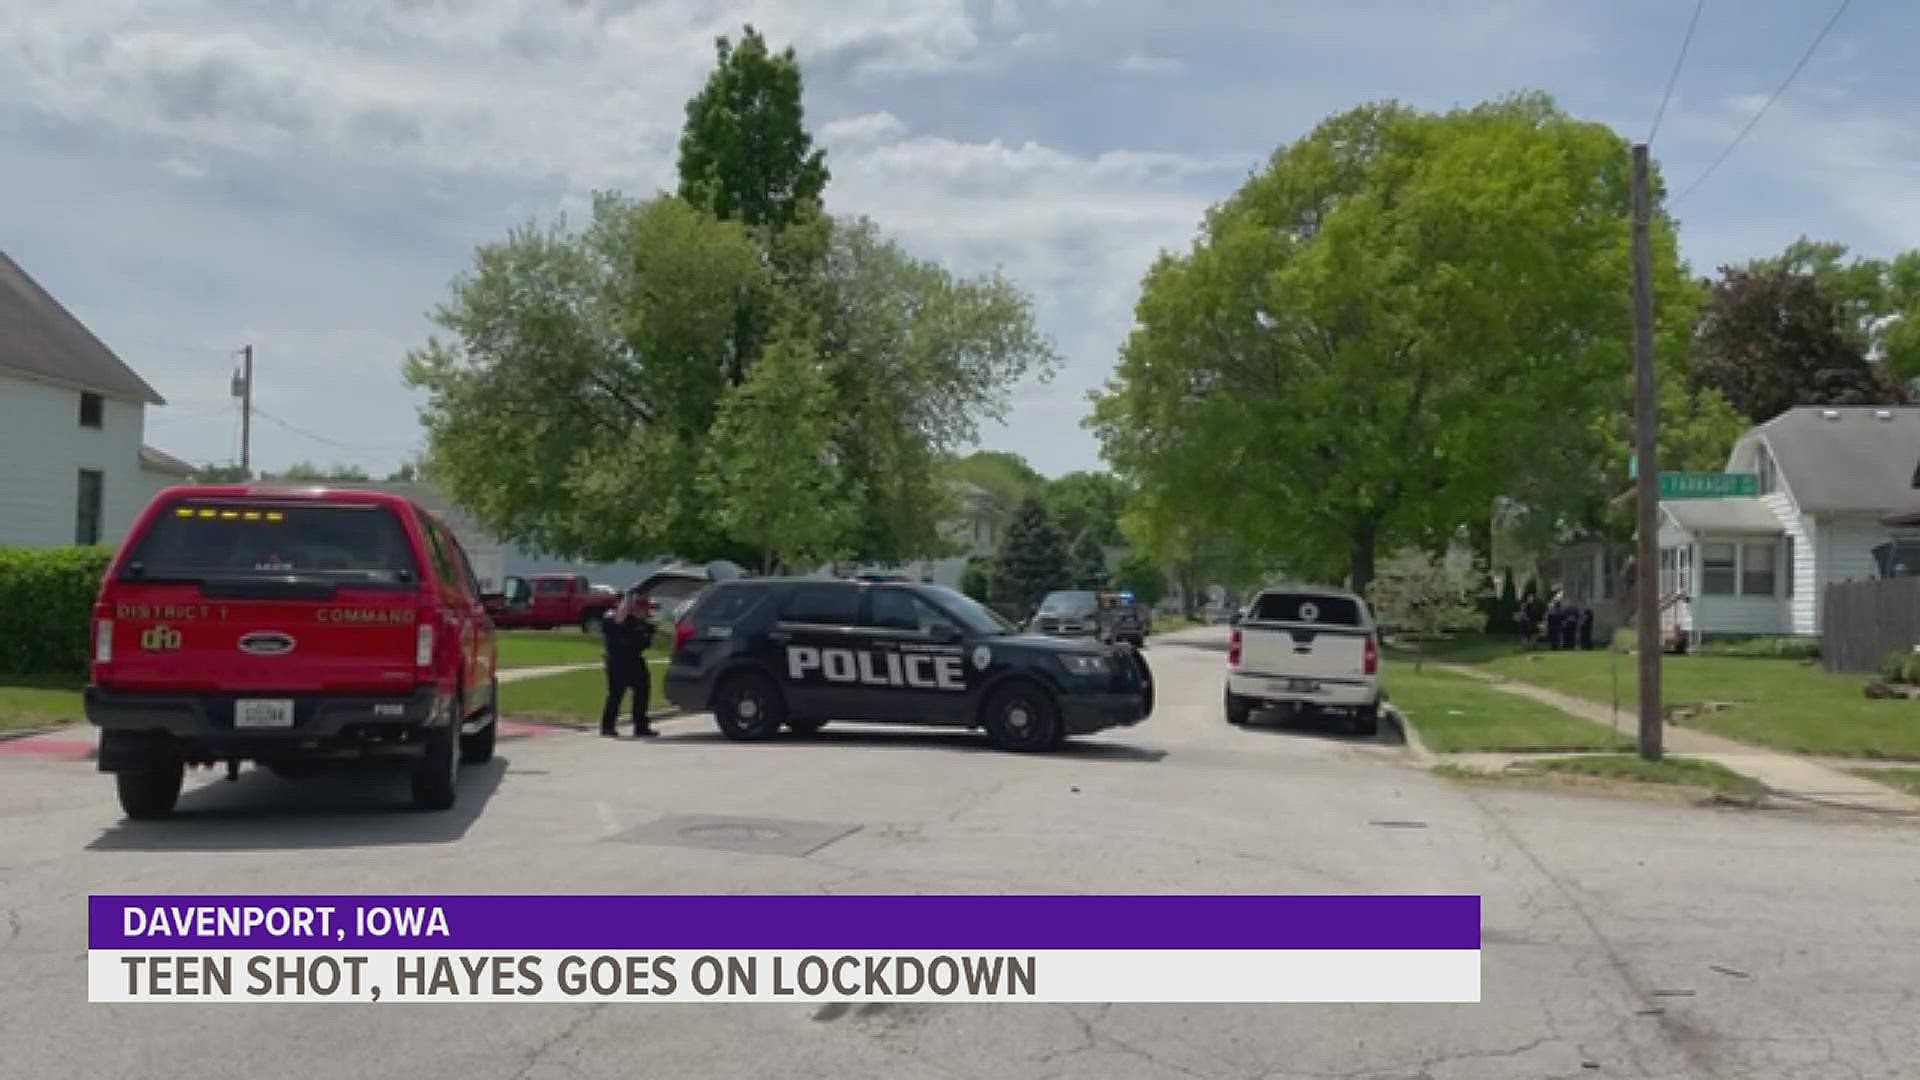 The injury was non-life threatening and the school was placed on lockdown as a precaution, according to police.